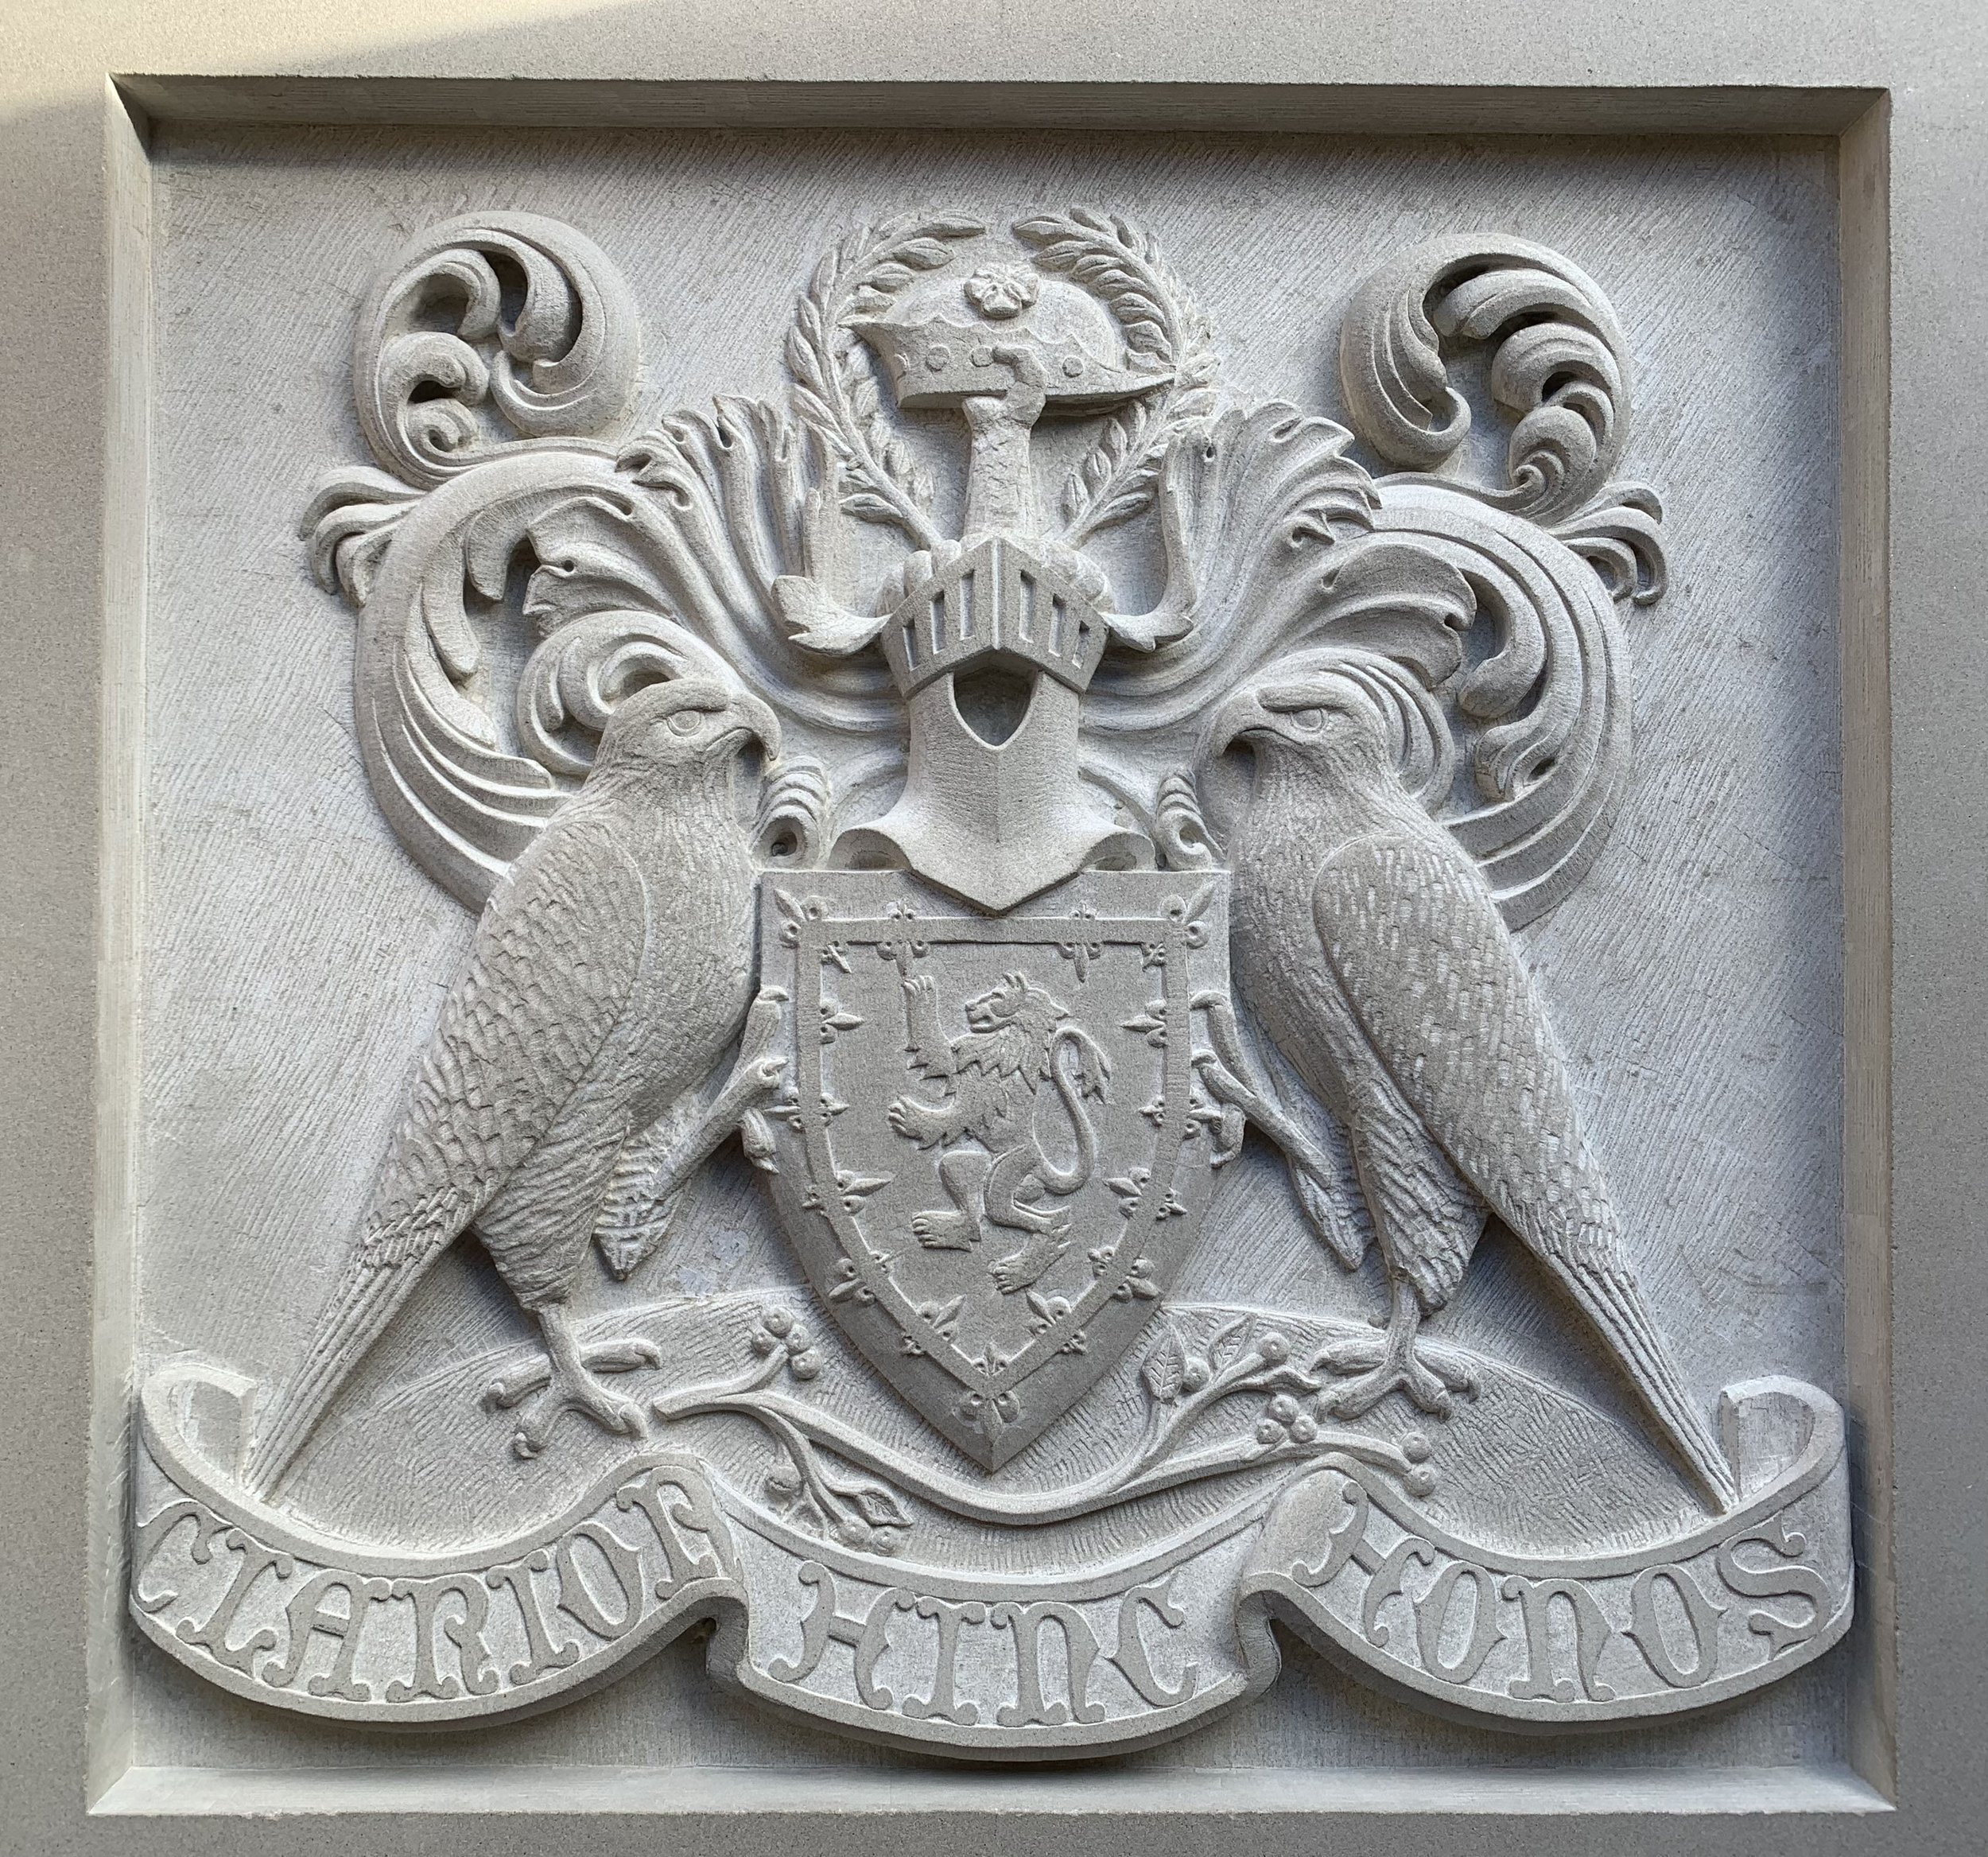  The finished hand-carved crest 